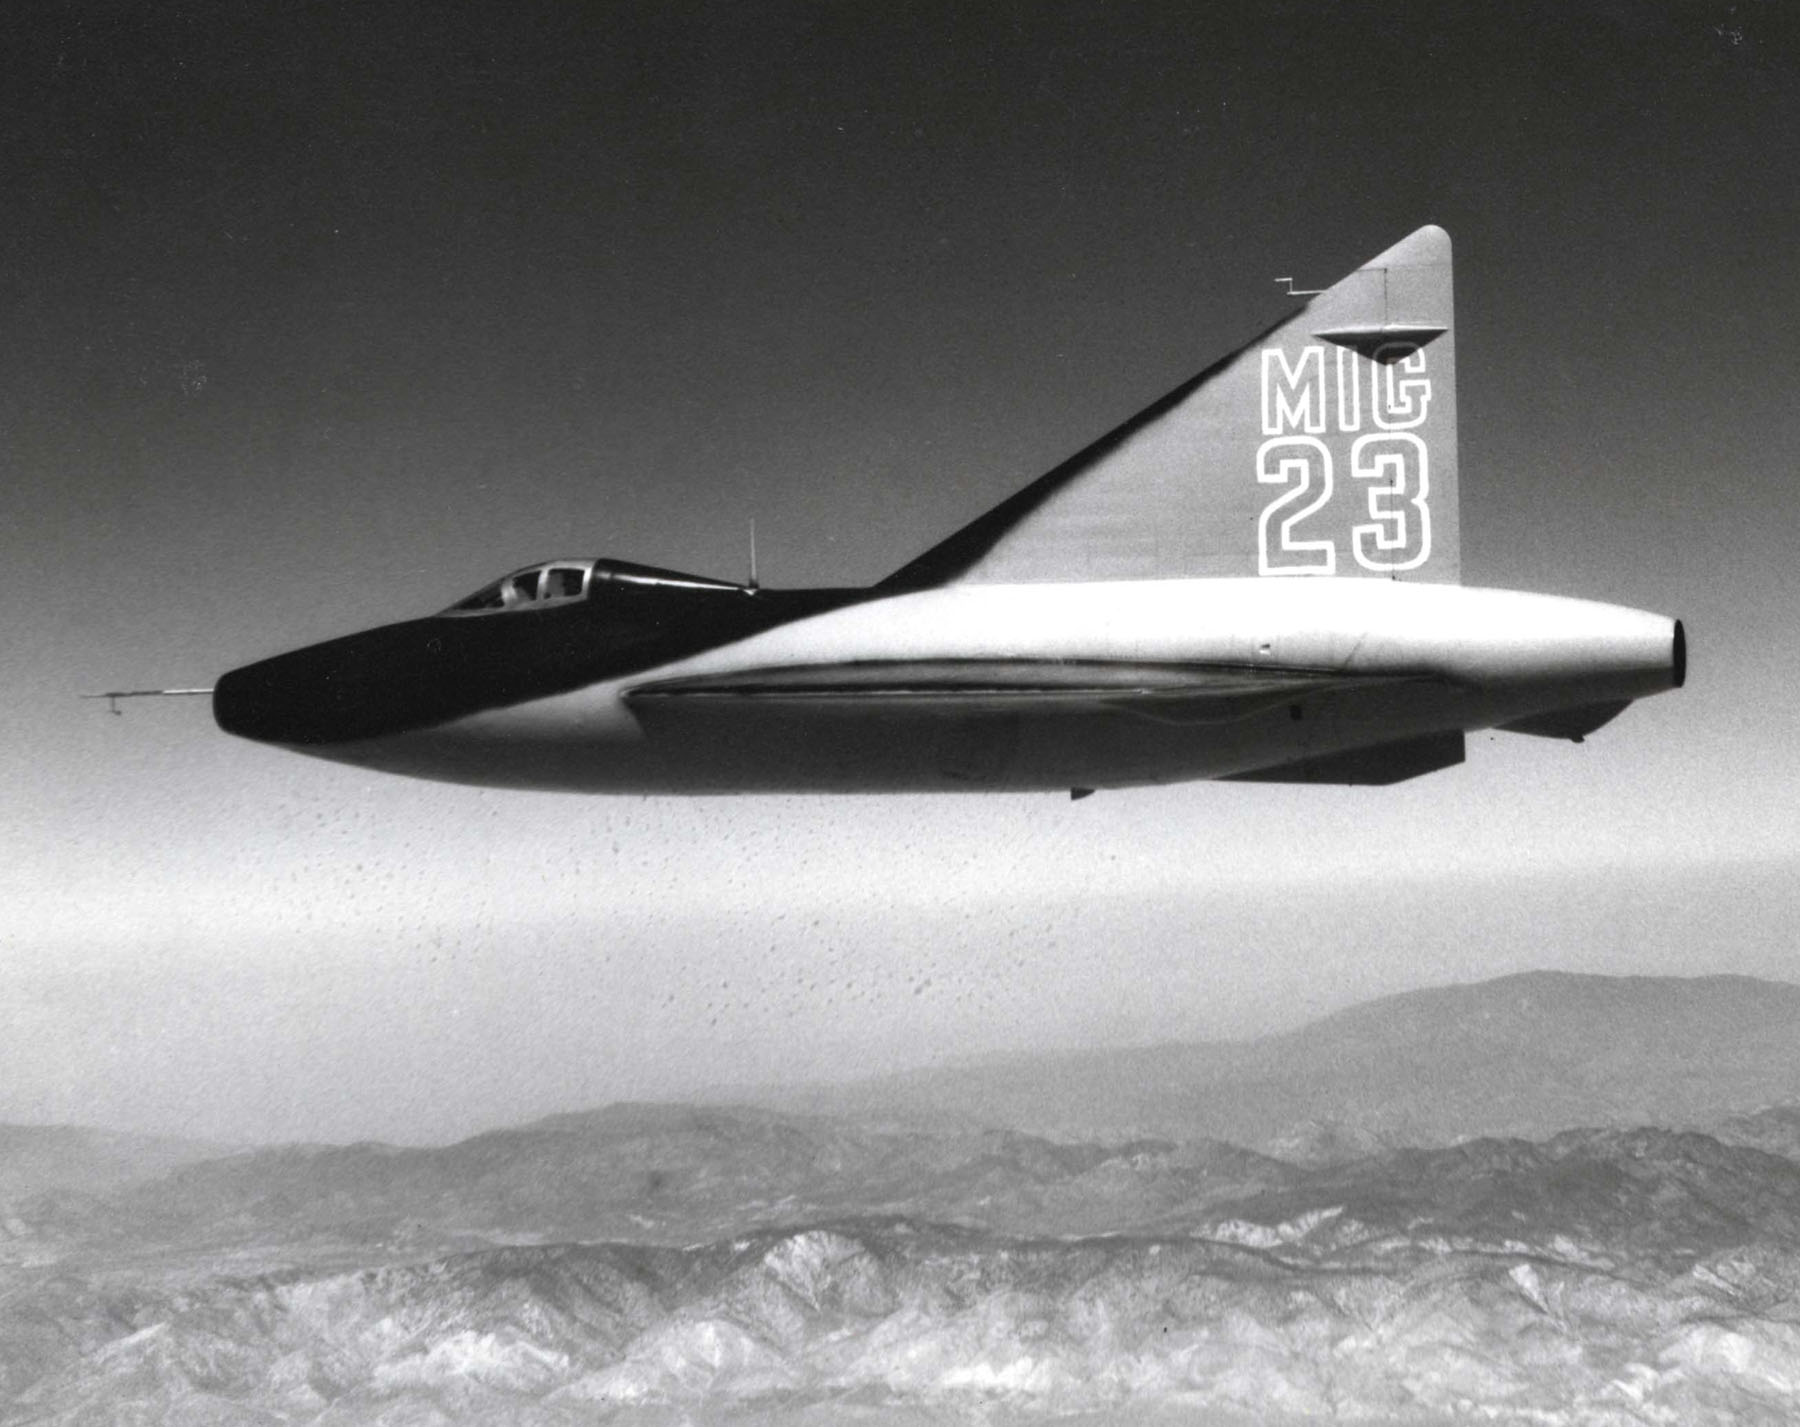 The XF-92 looks nothing like the Flogger.